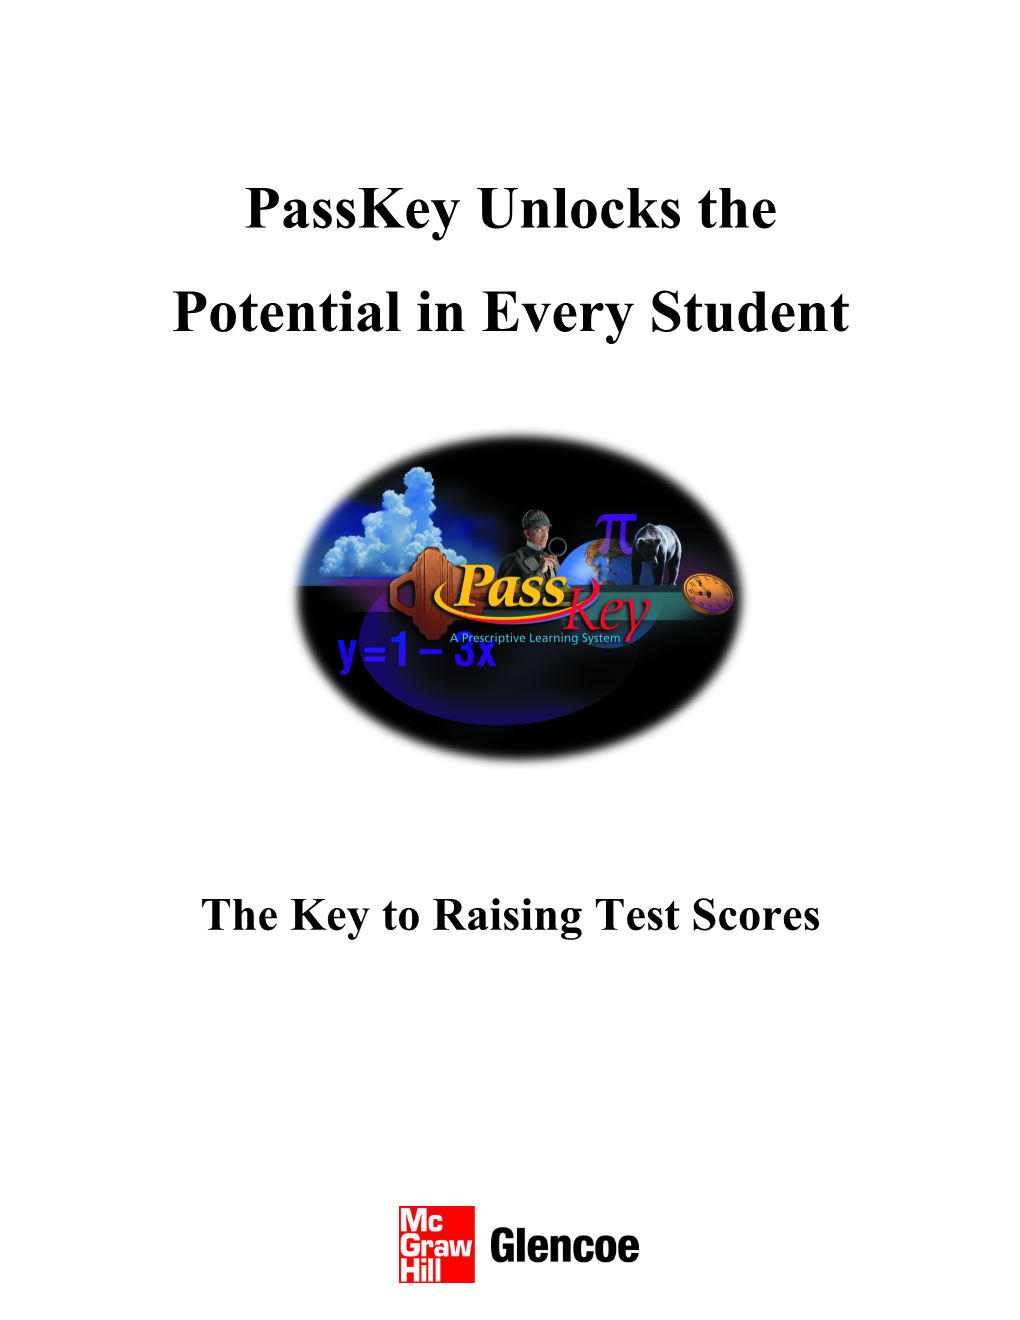 Passkey Unlocks the Potential in Every Student